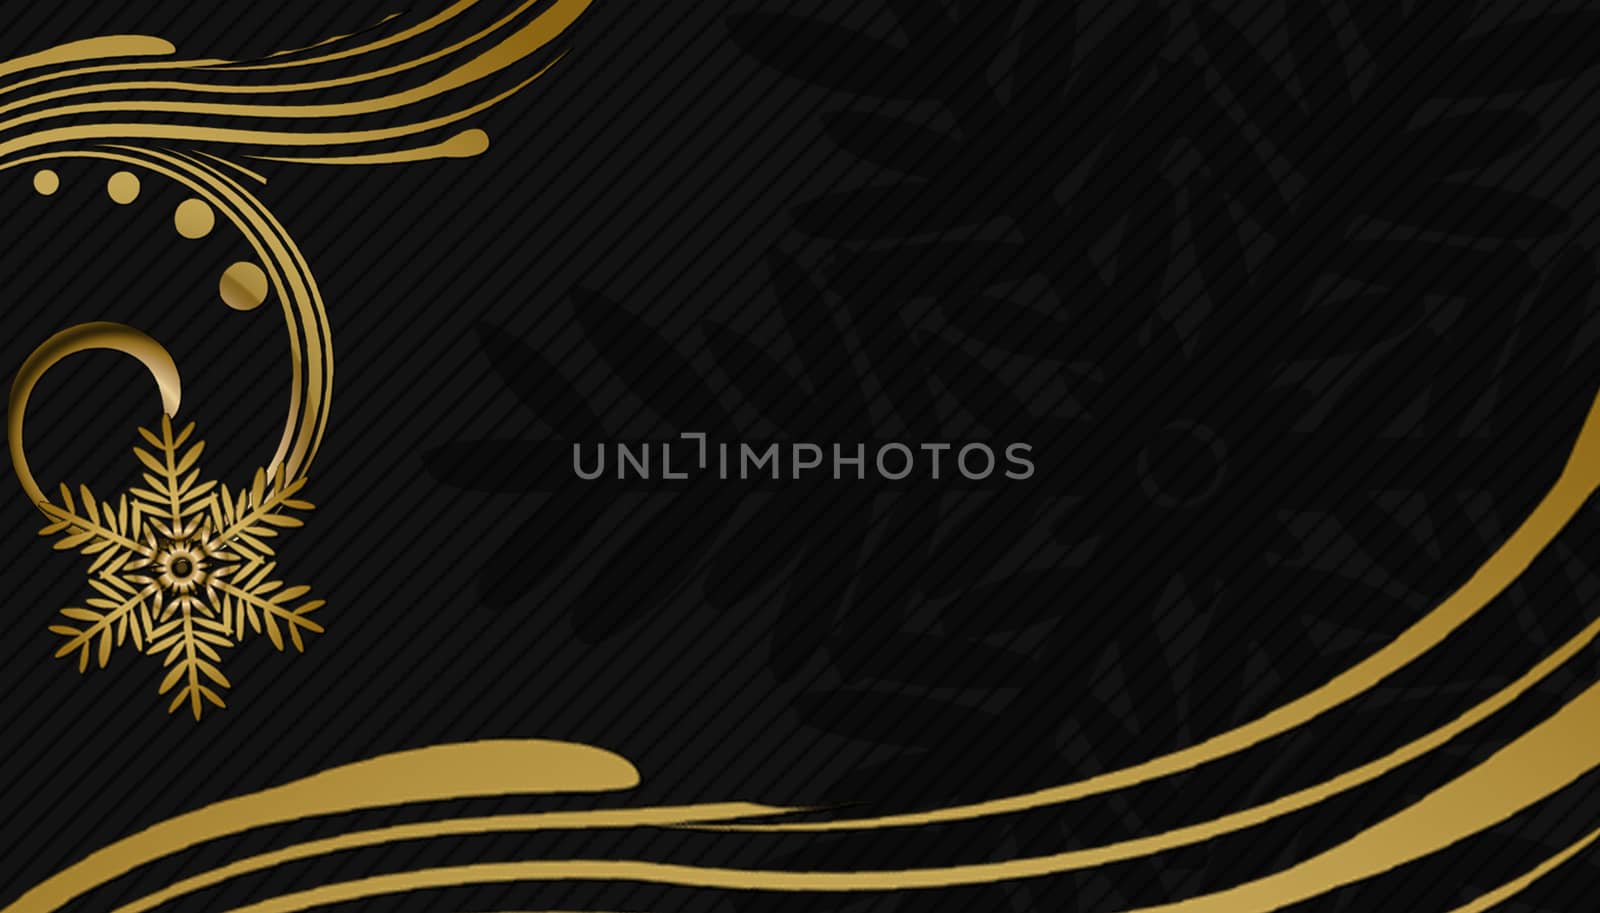 black christmas background with golden ornaments and snowflakes luxory